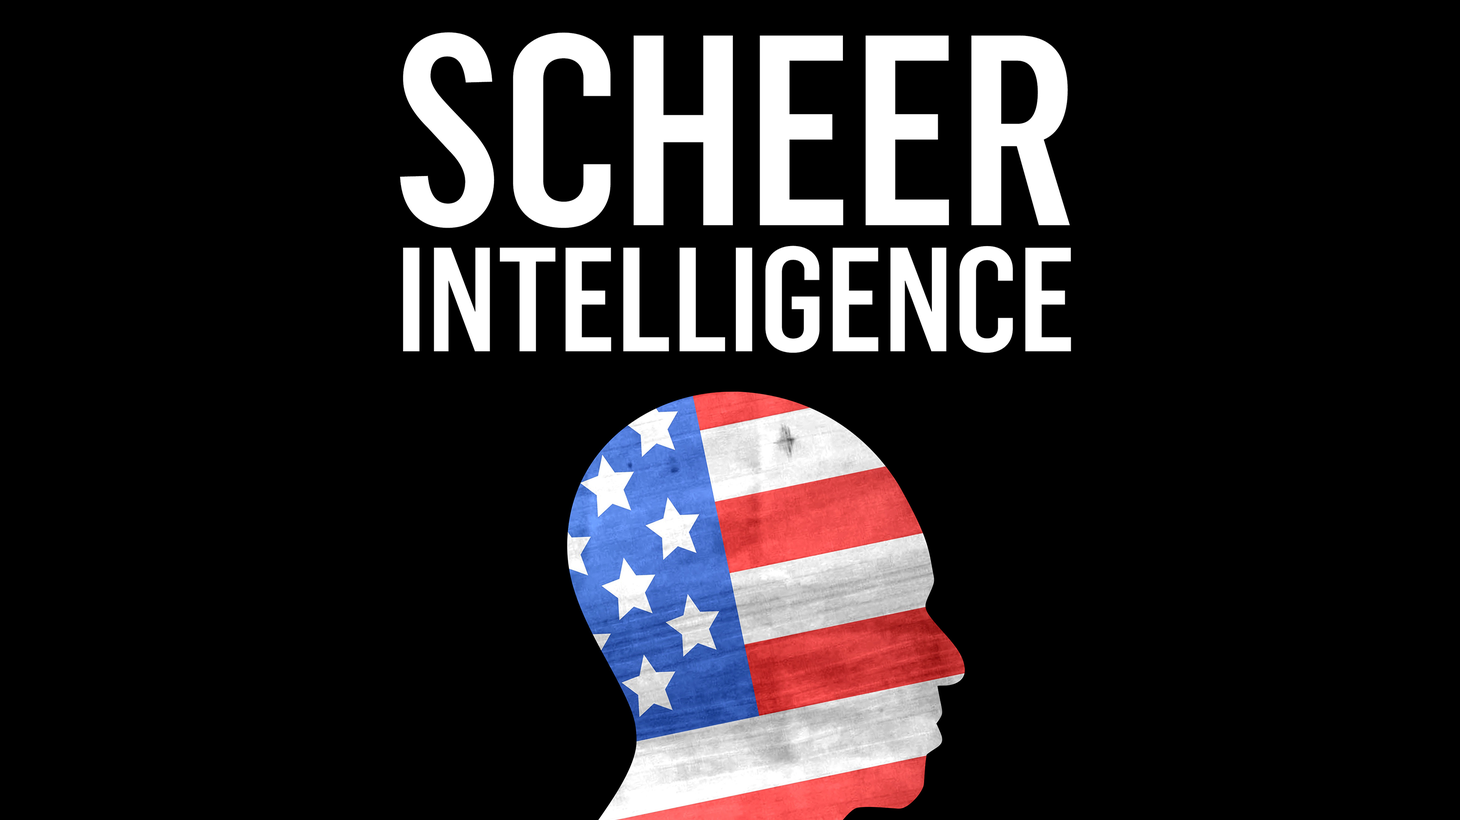 In this week’s Scheer Intelligence, Robert Scheer sits down with author and academic Larry Gross to discuss how once “invisible” closeted gay men and women eventually formed a powerful community over the middle and late 20th century.